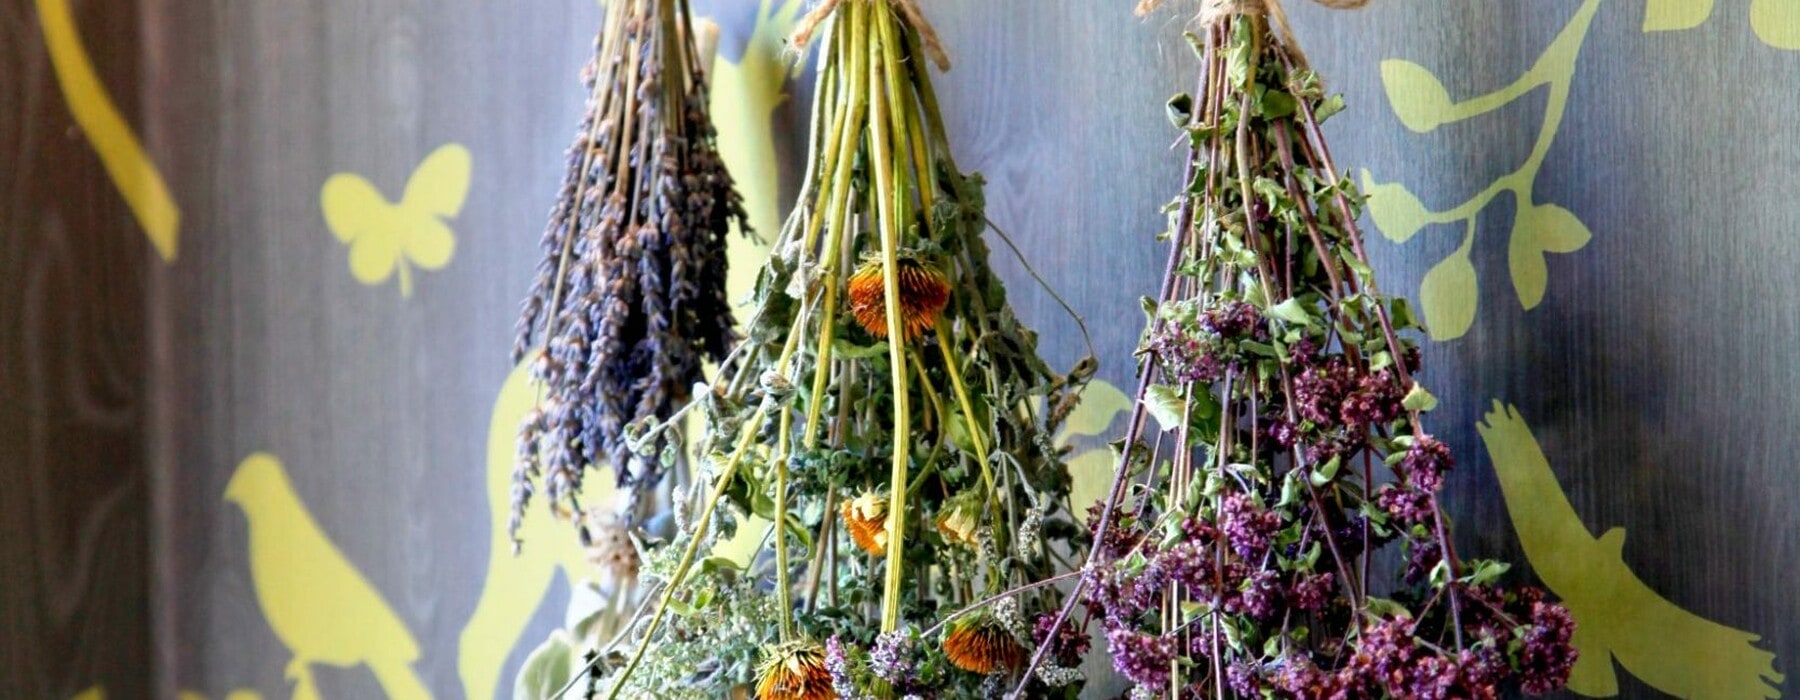 hanging dried shrubs and herbs